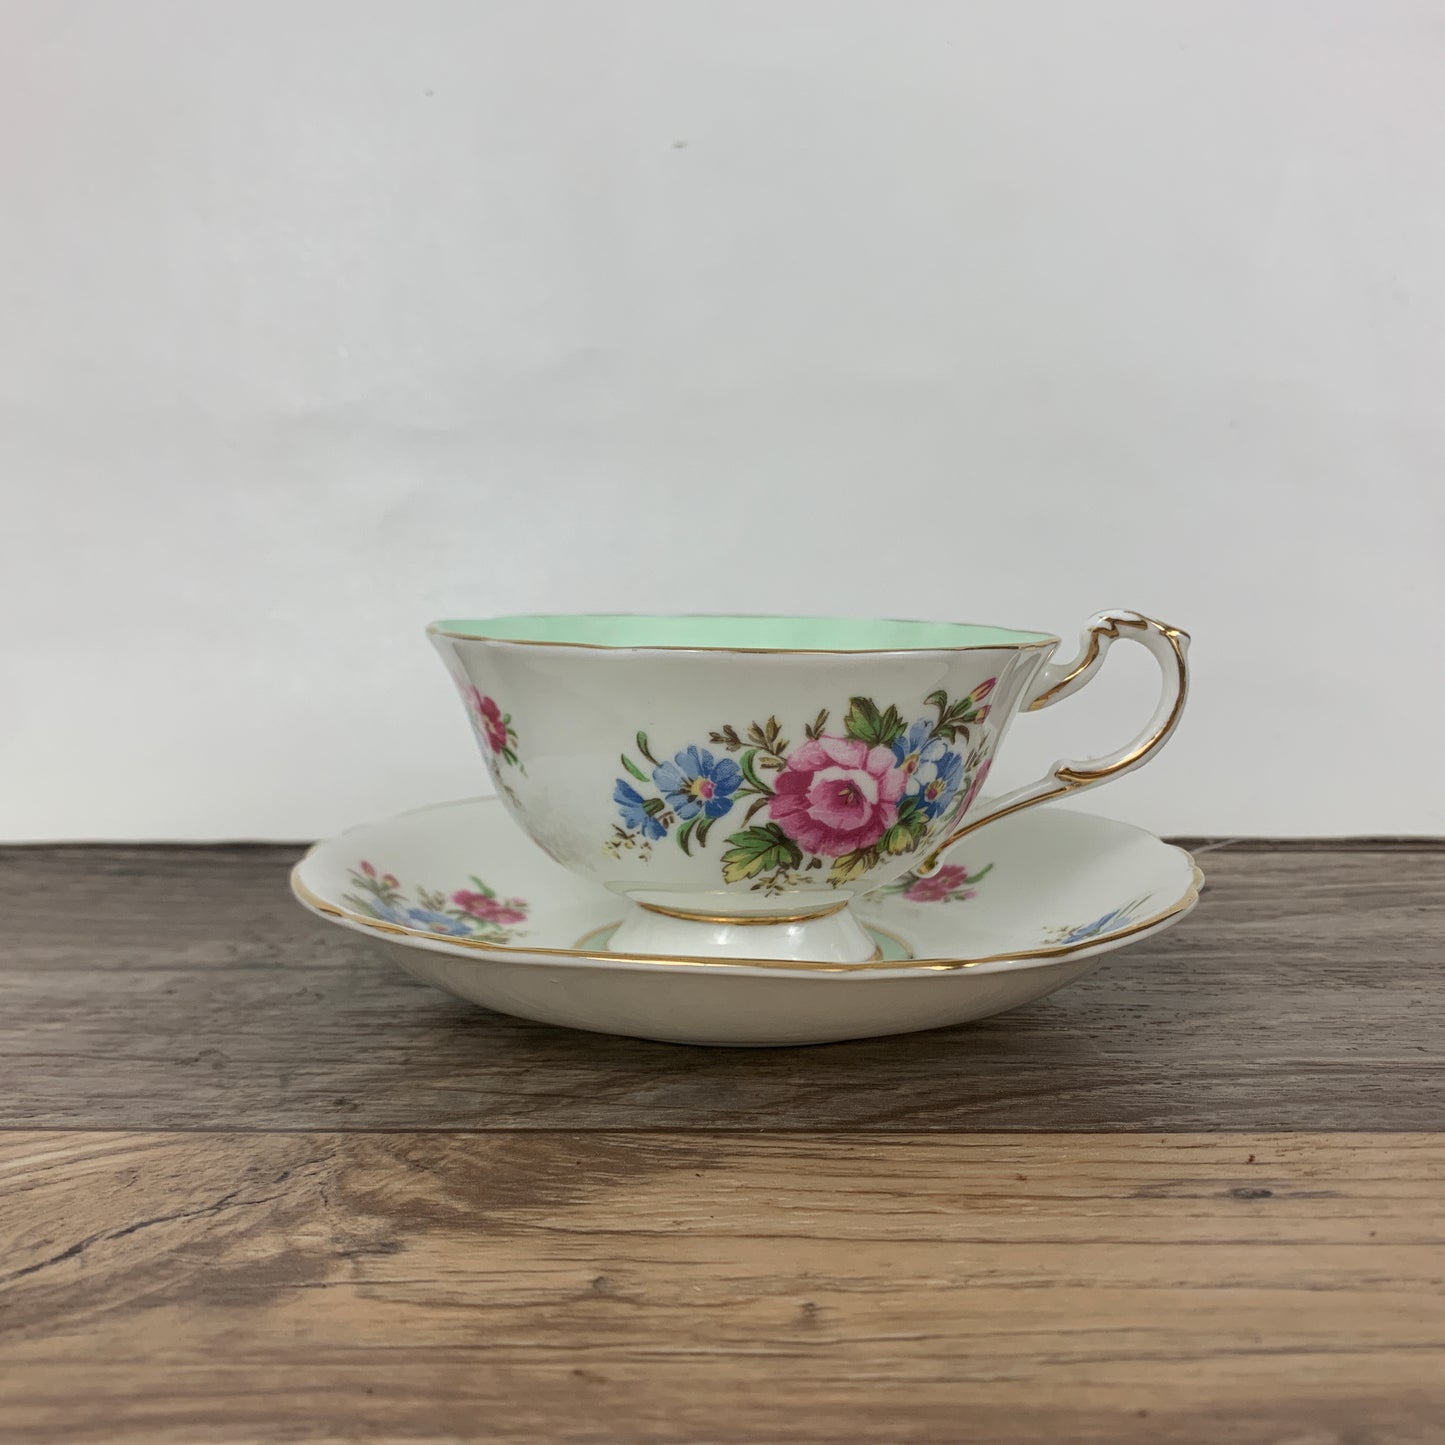 White and Mint Green Double Warrant English Tea Cup Vintage Paragon Teacup,